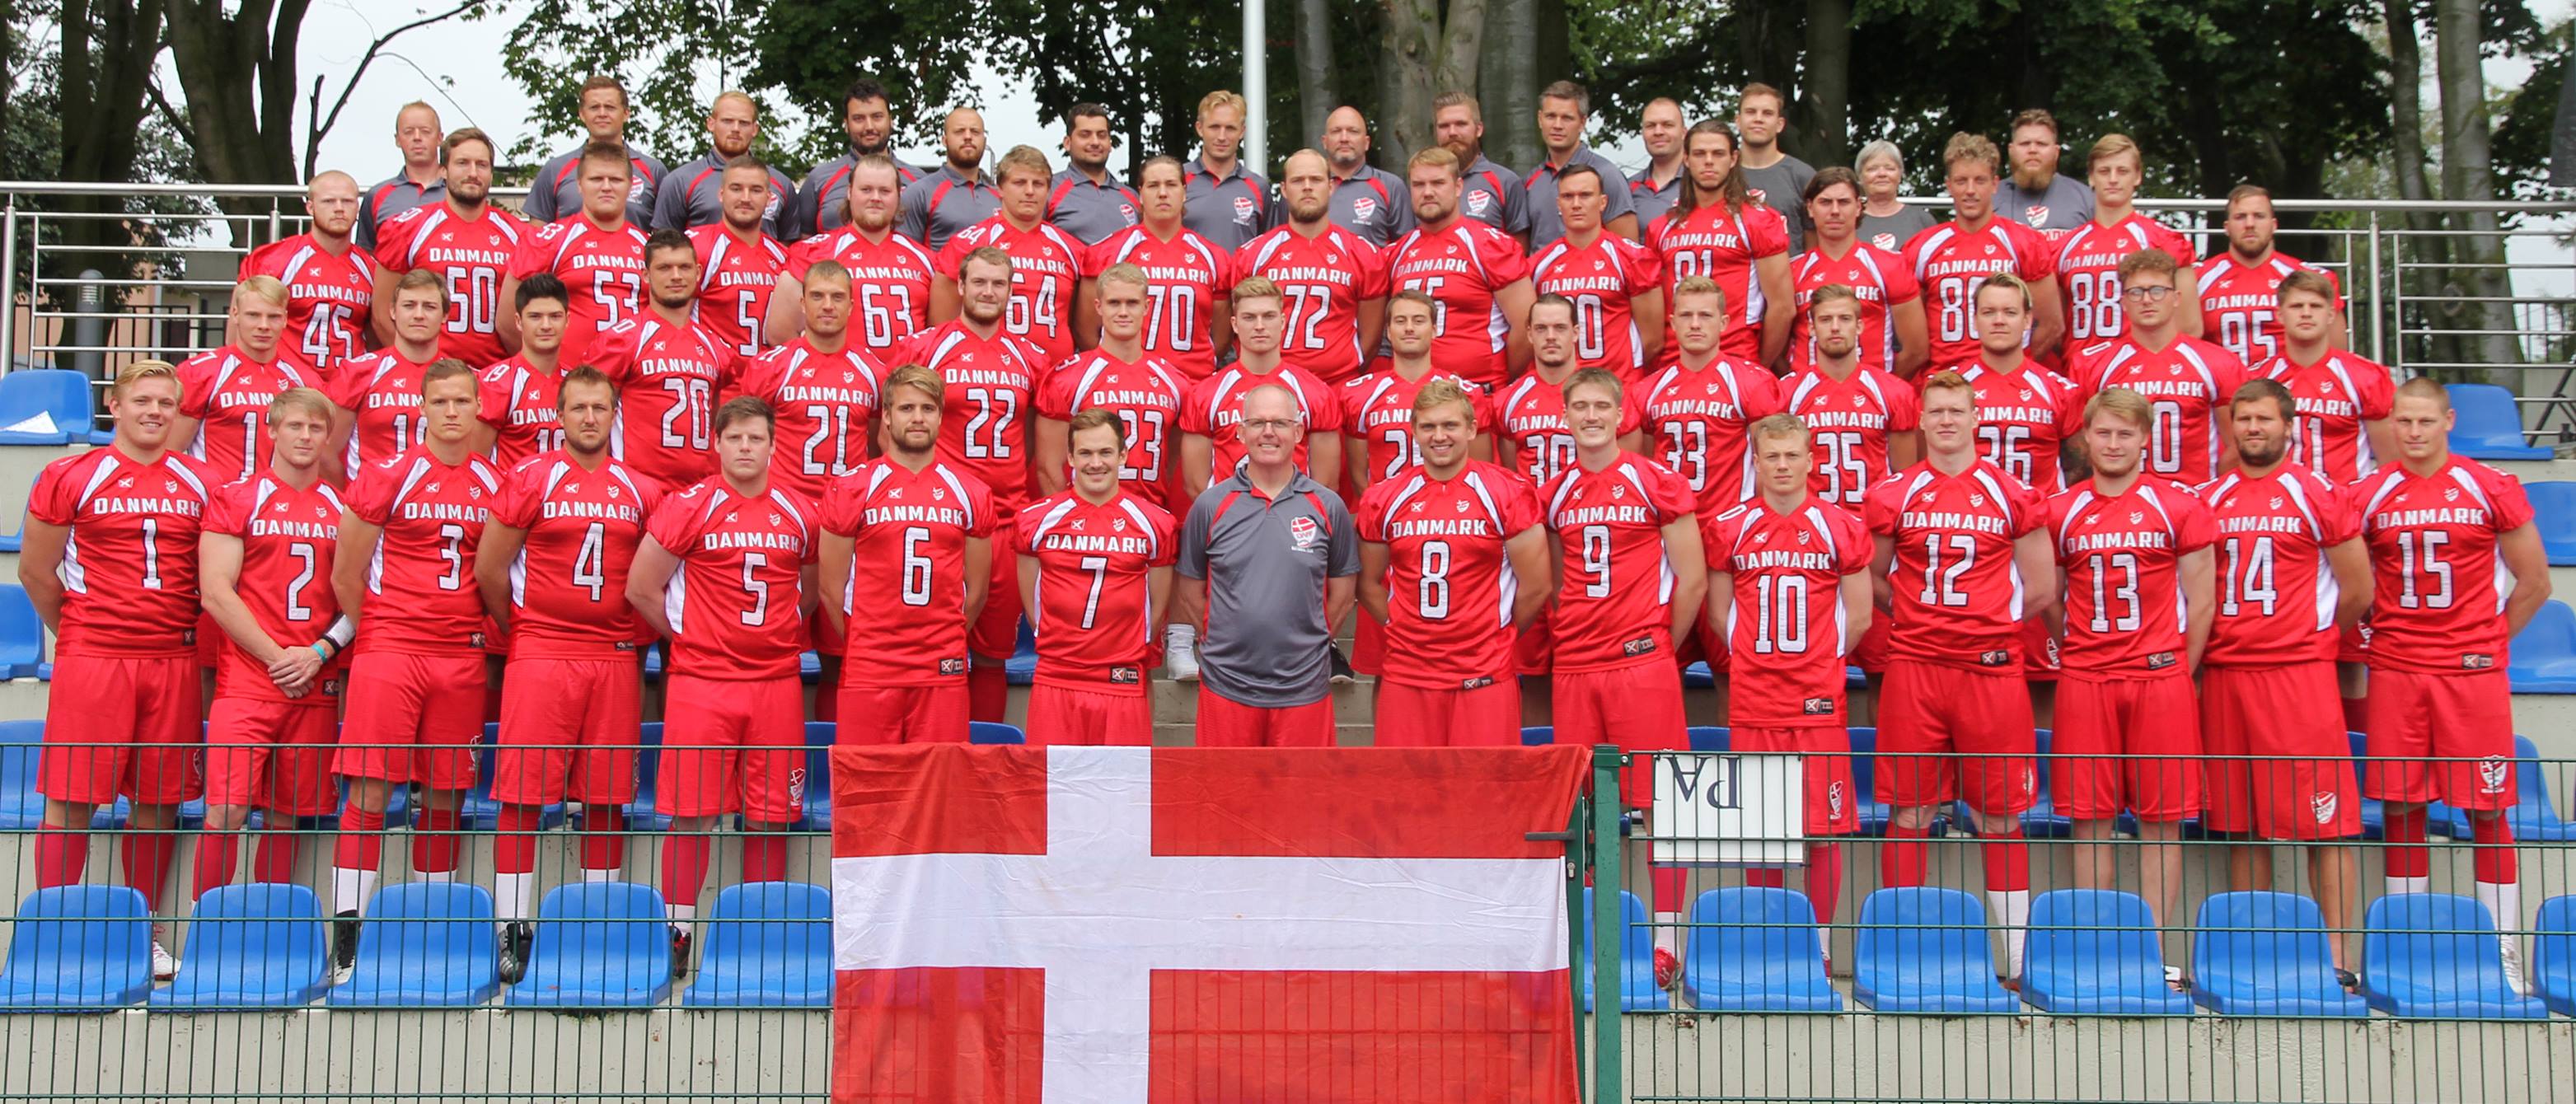 The Complete List of American Football Teams in Denmark | The Growth of